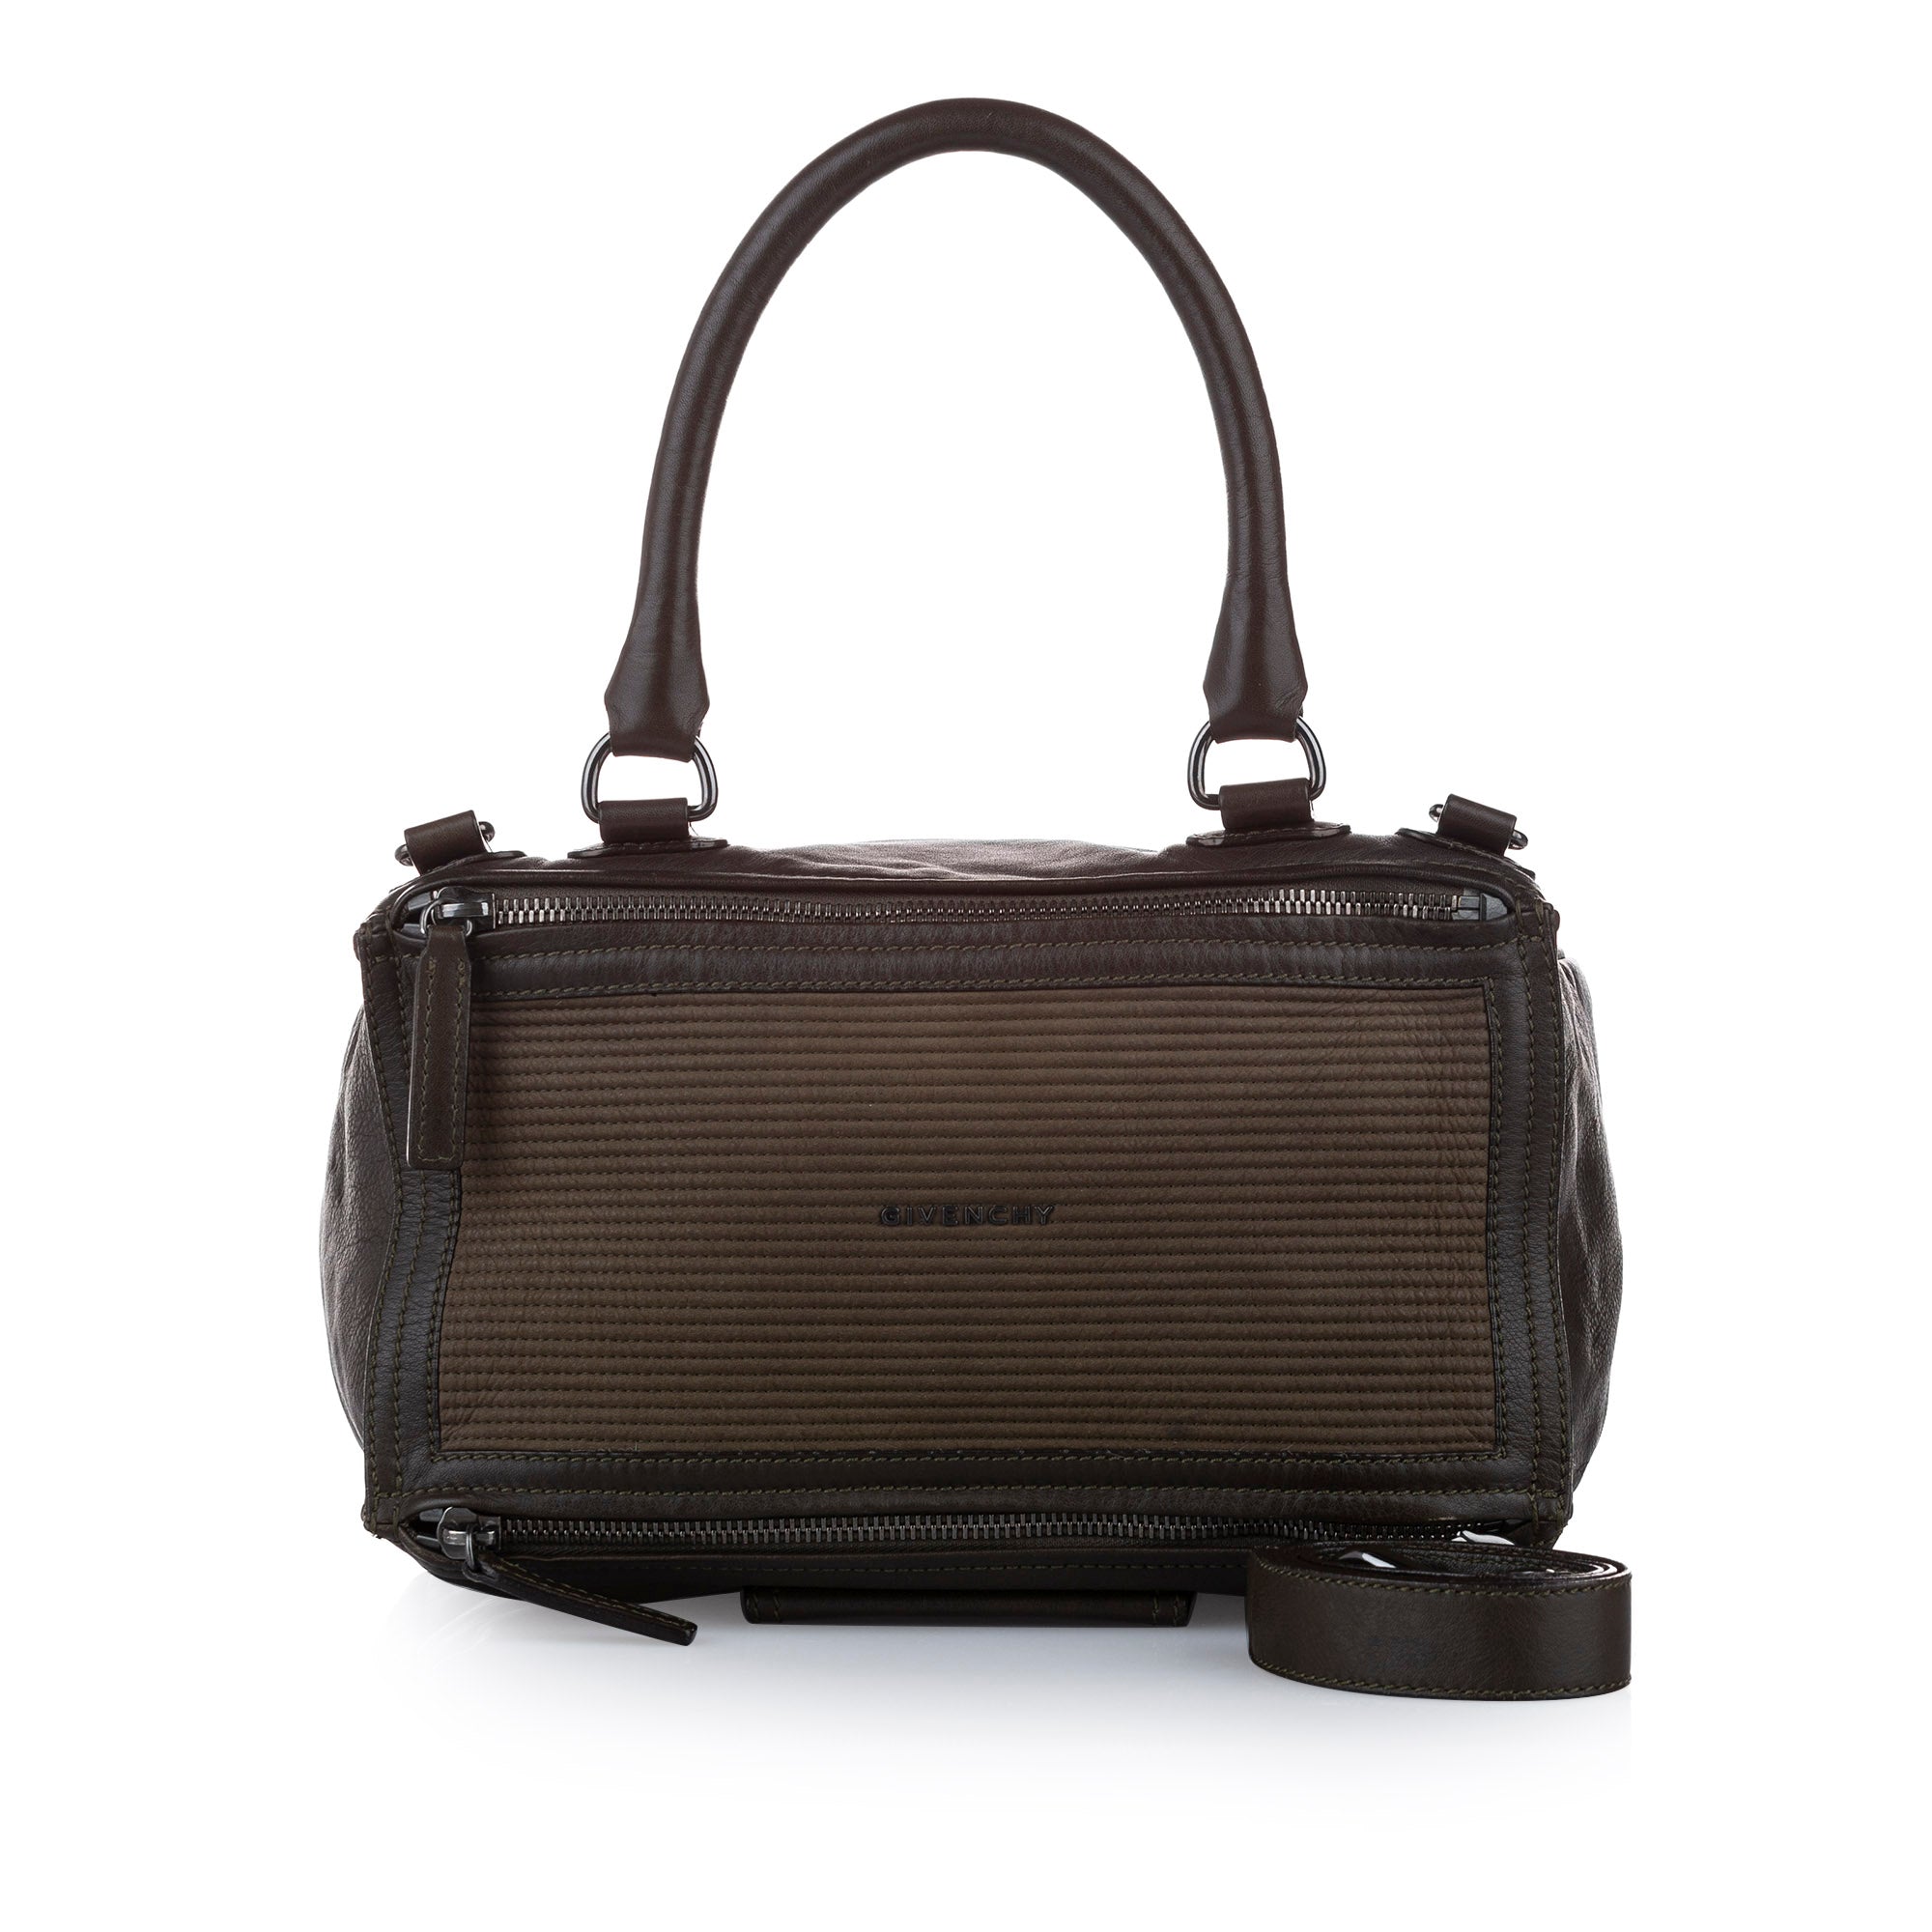 Givenchy Givenchy Mini Pandora Bag In Brown Leather on SALE